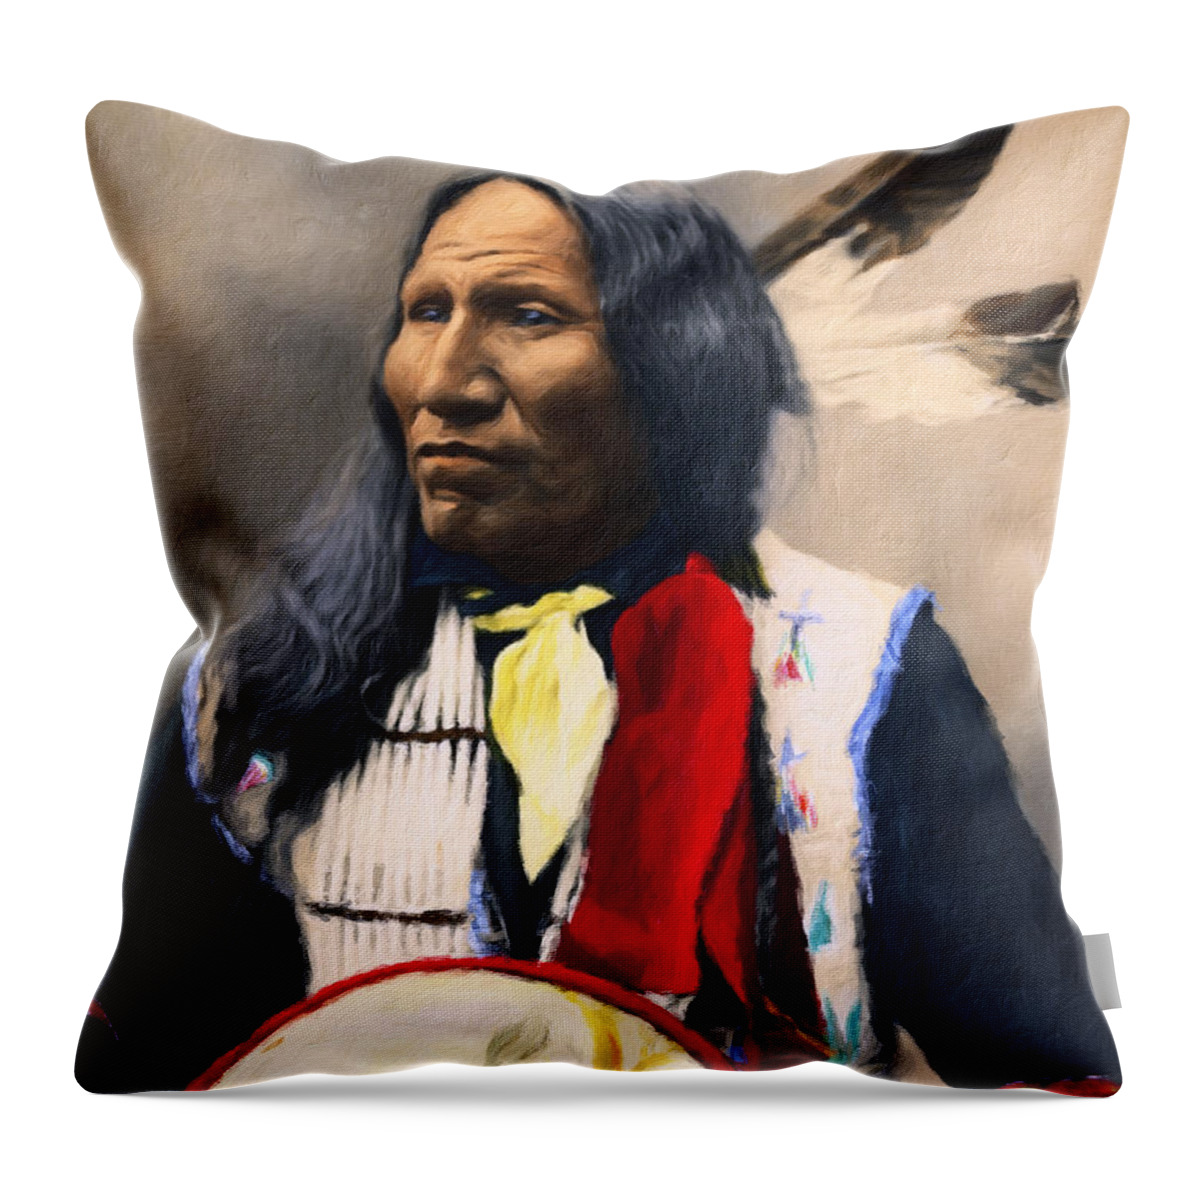 Sioux Chief Portrait Throw Pillow featuring the painting Sioux Chief Portrait by Georgiana Romanovna